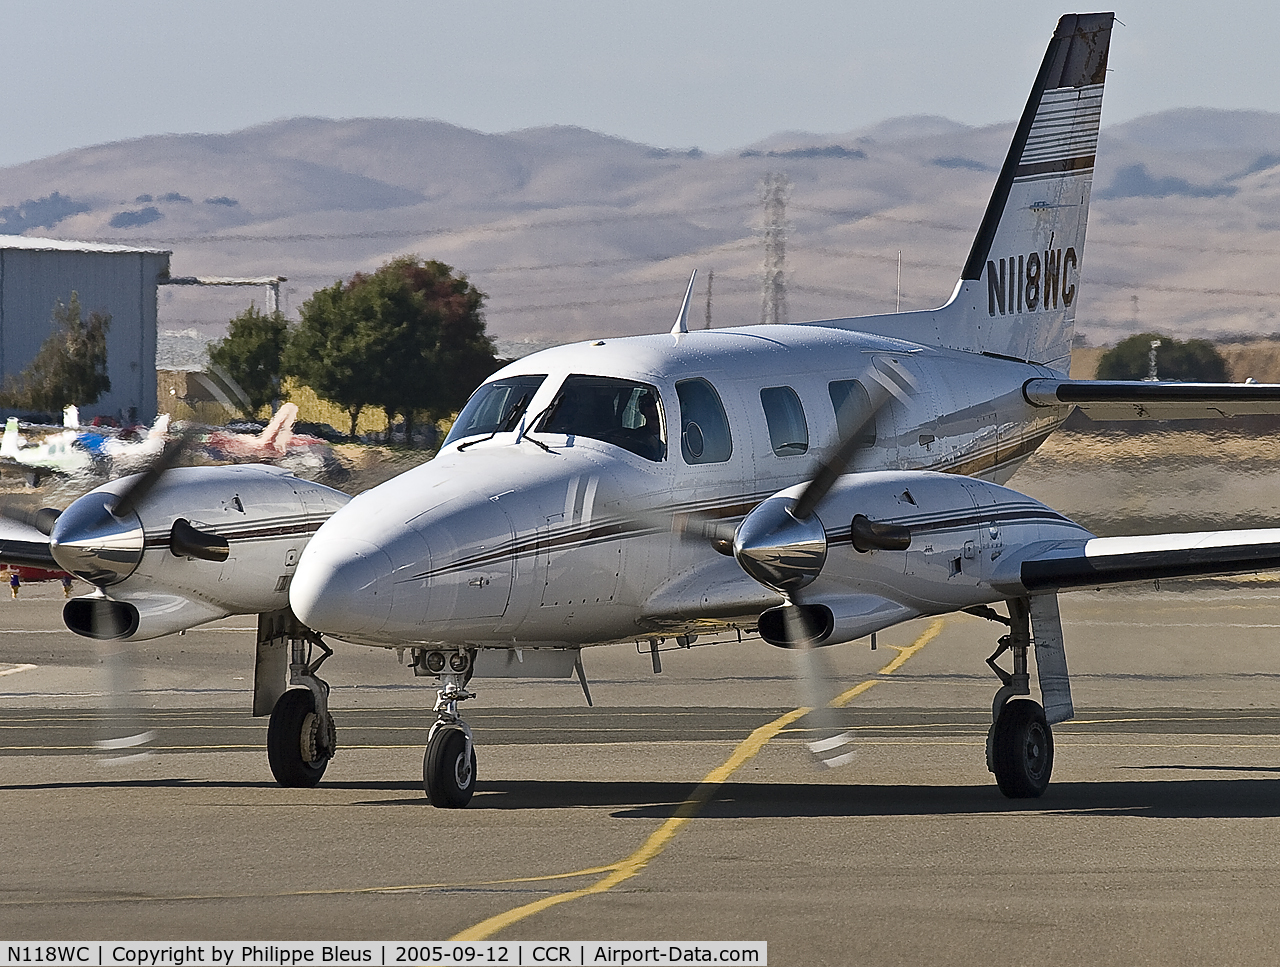 N118WC, 1979 Piper PA-31T C/N 31T-8020020, Taxiing after landing on rwy 32R